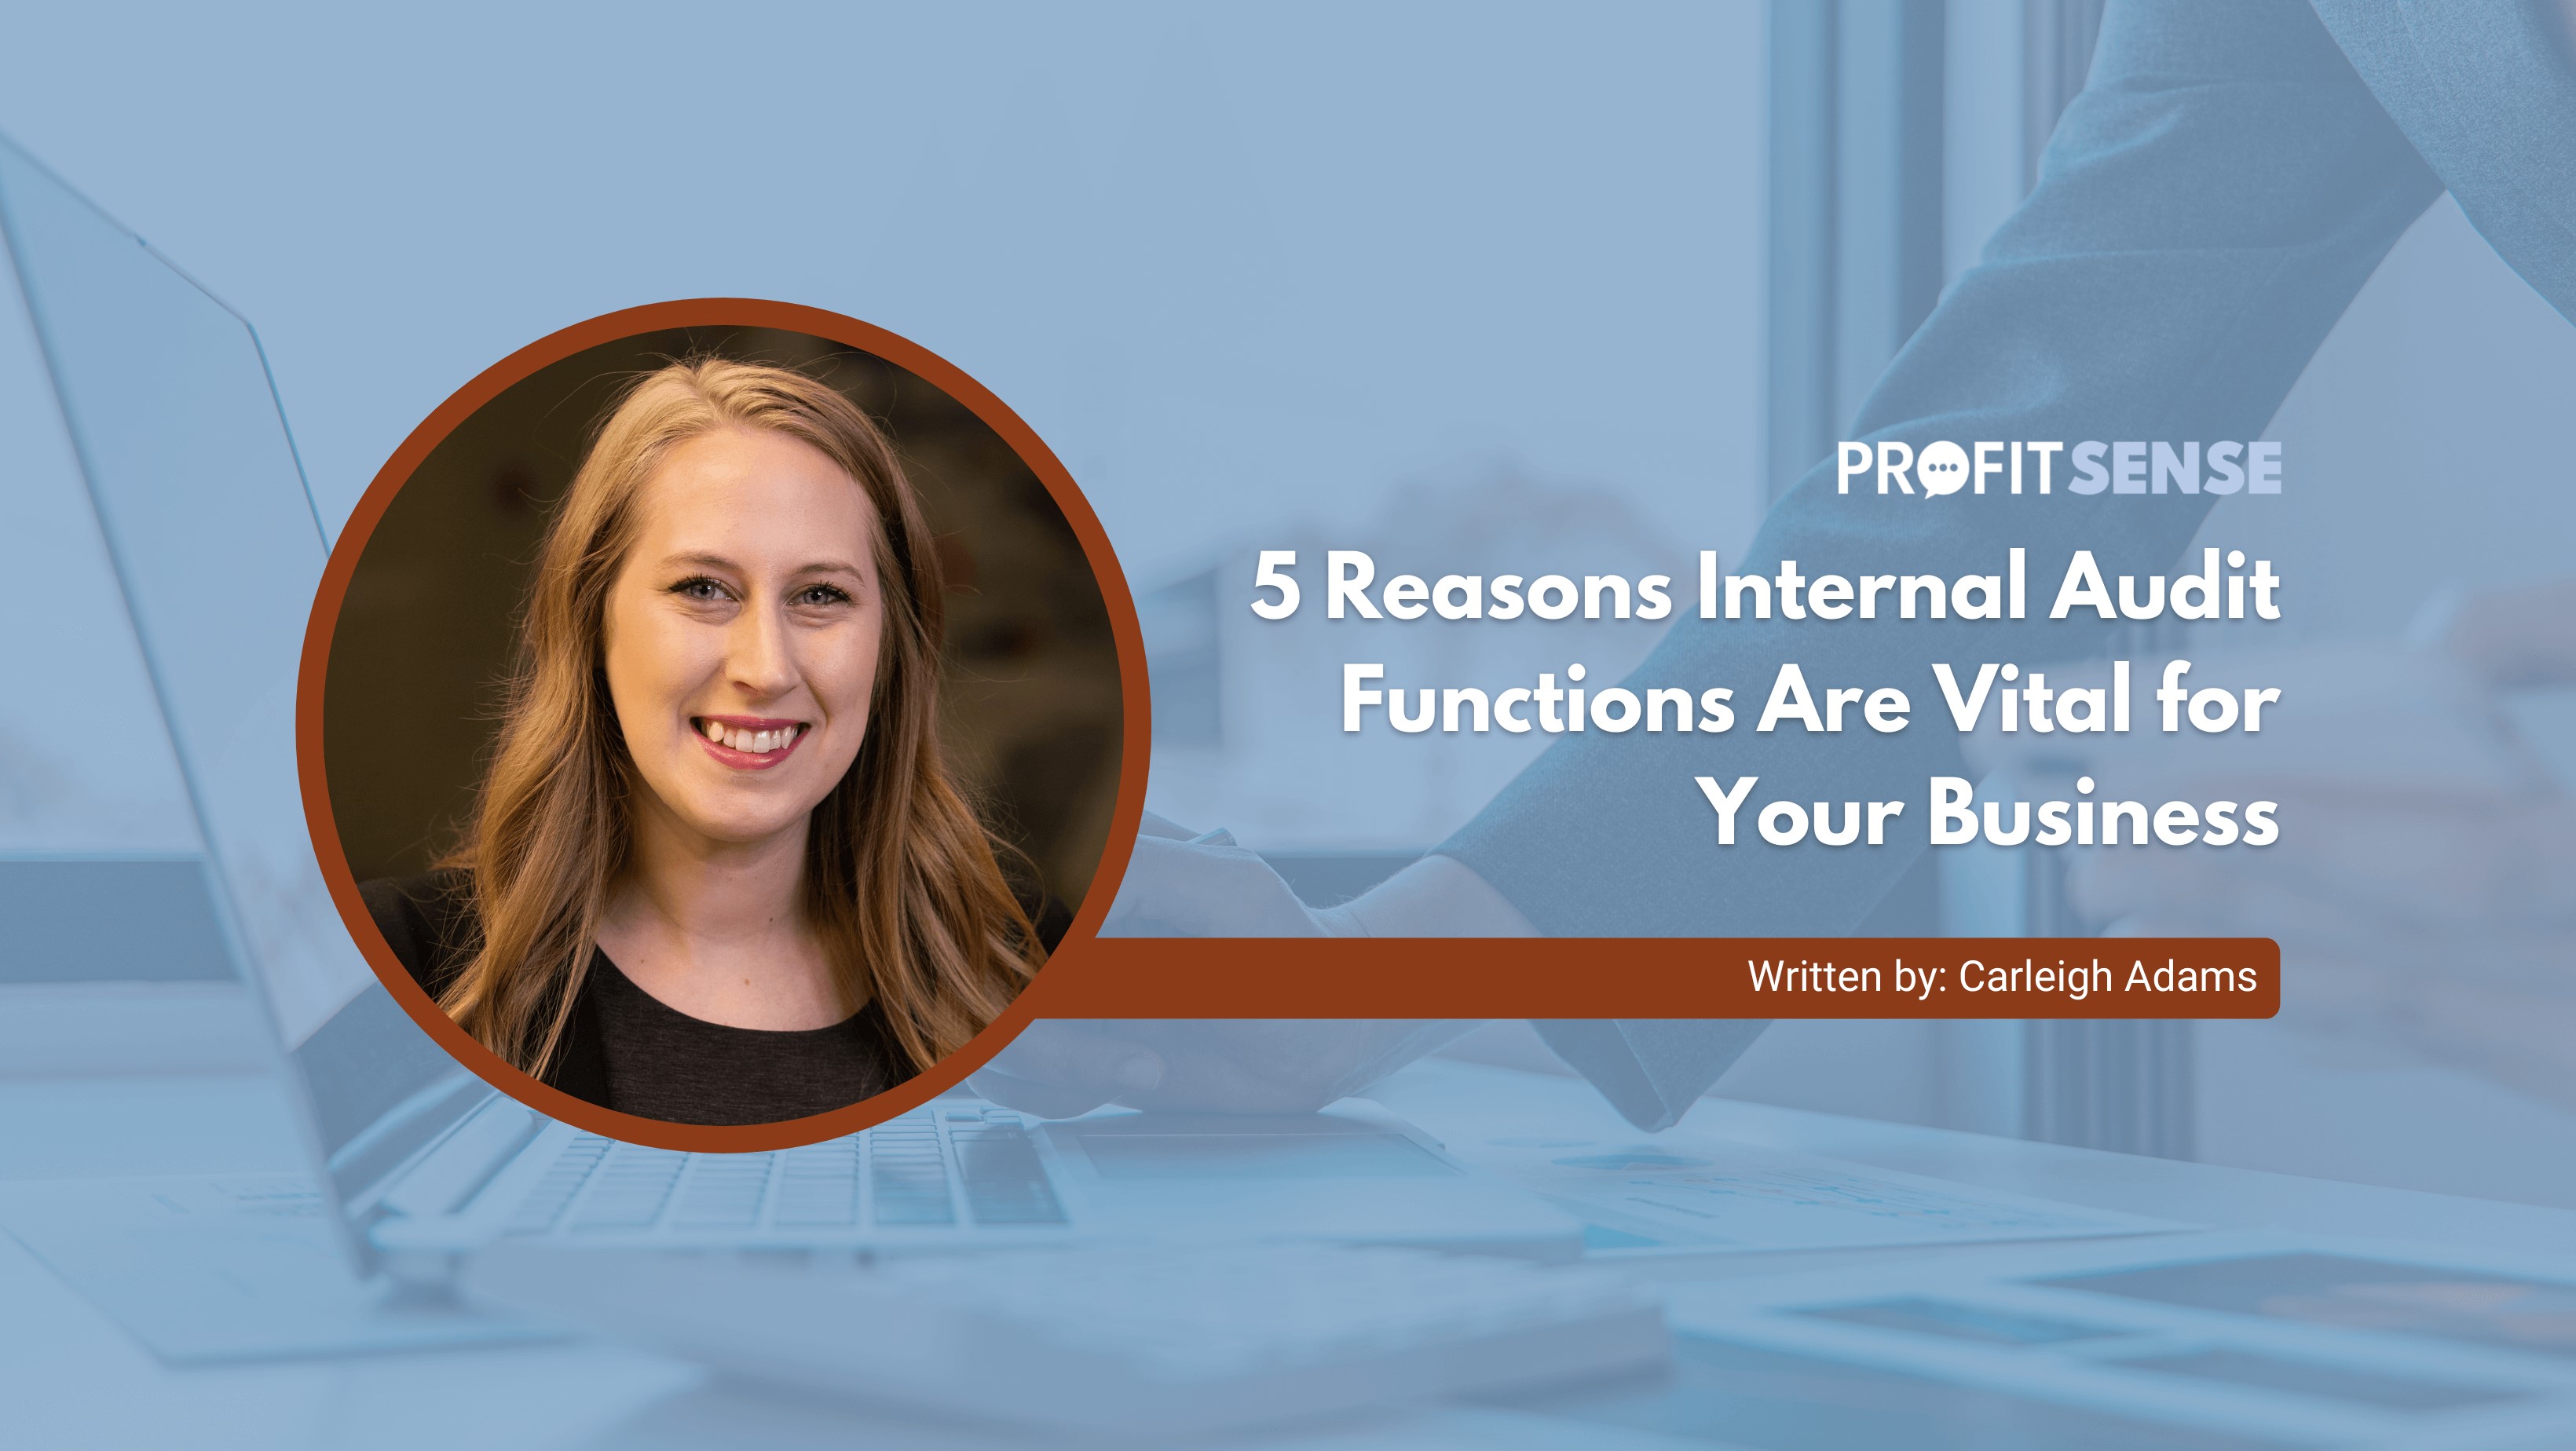 5 Reasons Internal Audit Functions are Vital for Your Business